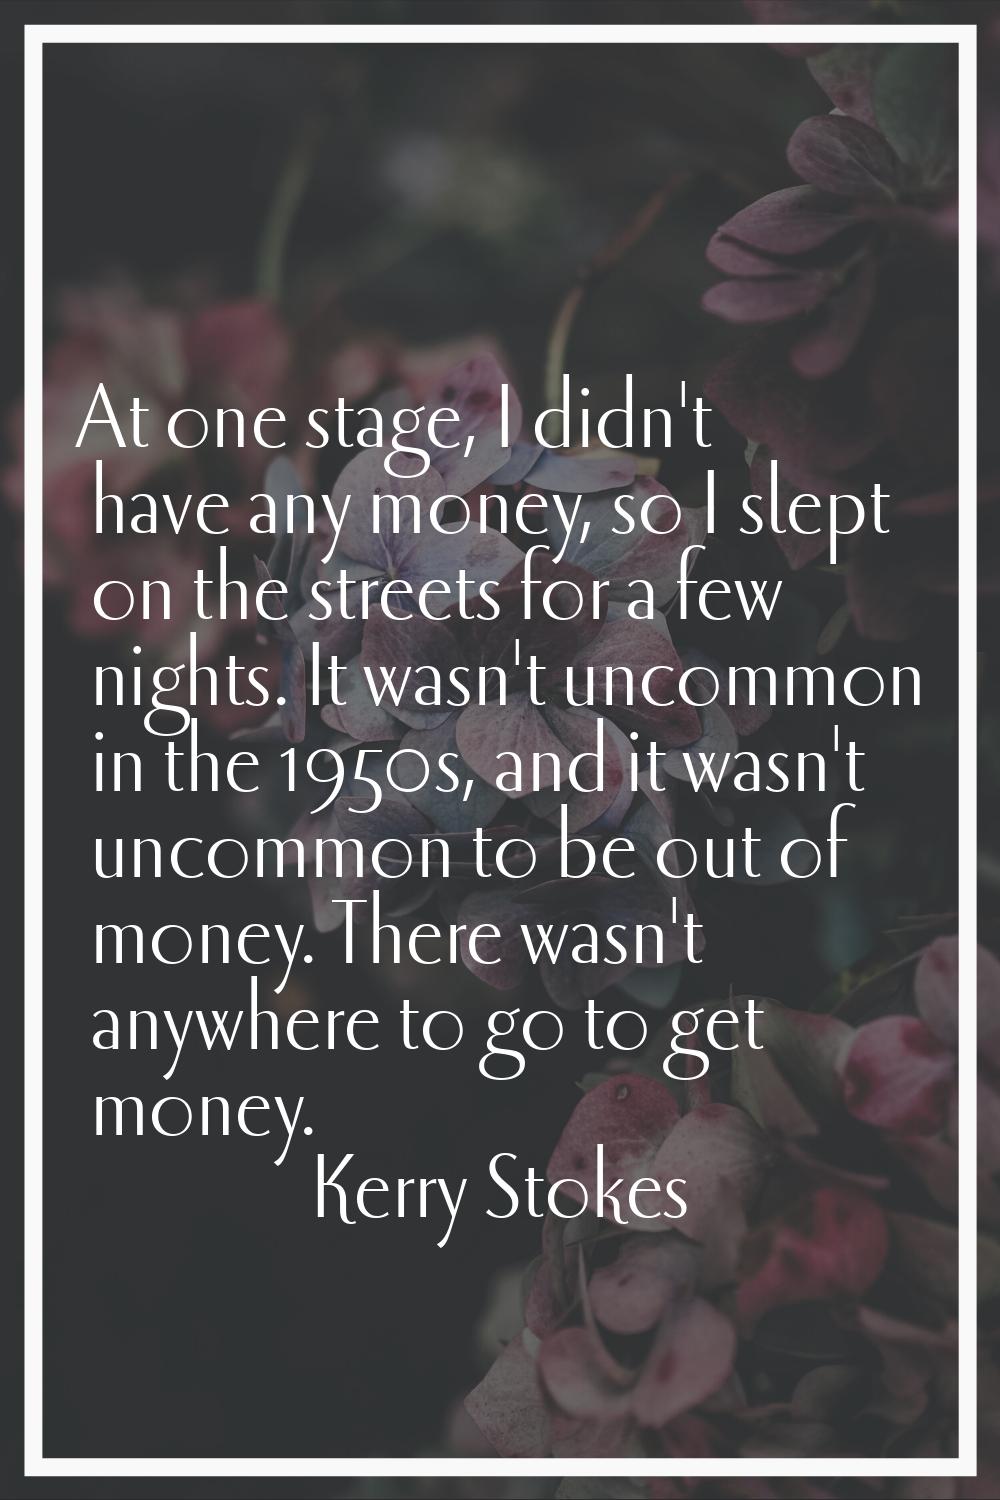 At one stage, I didn't have any money, so I slept on the streets for a few nights. It wasn't uncomm